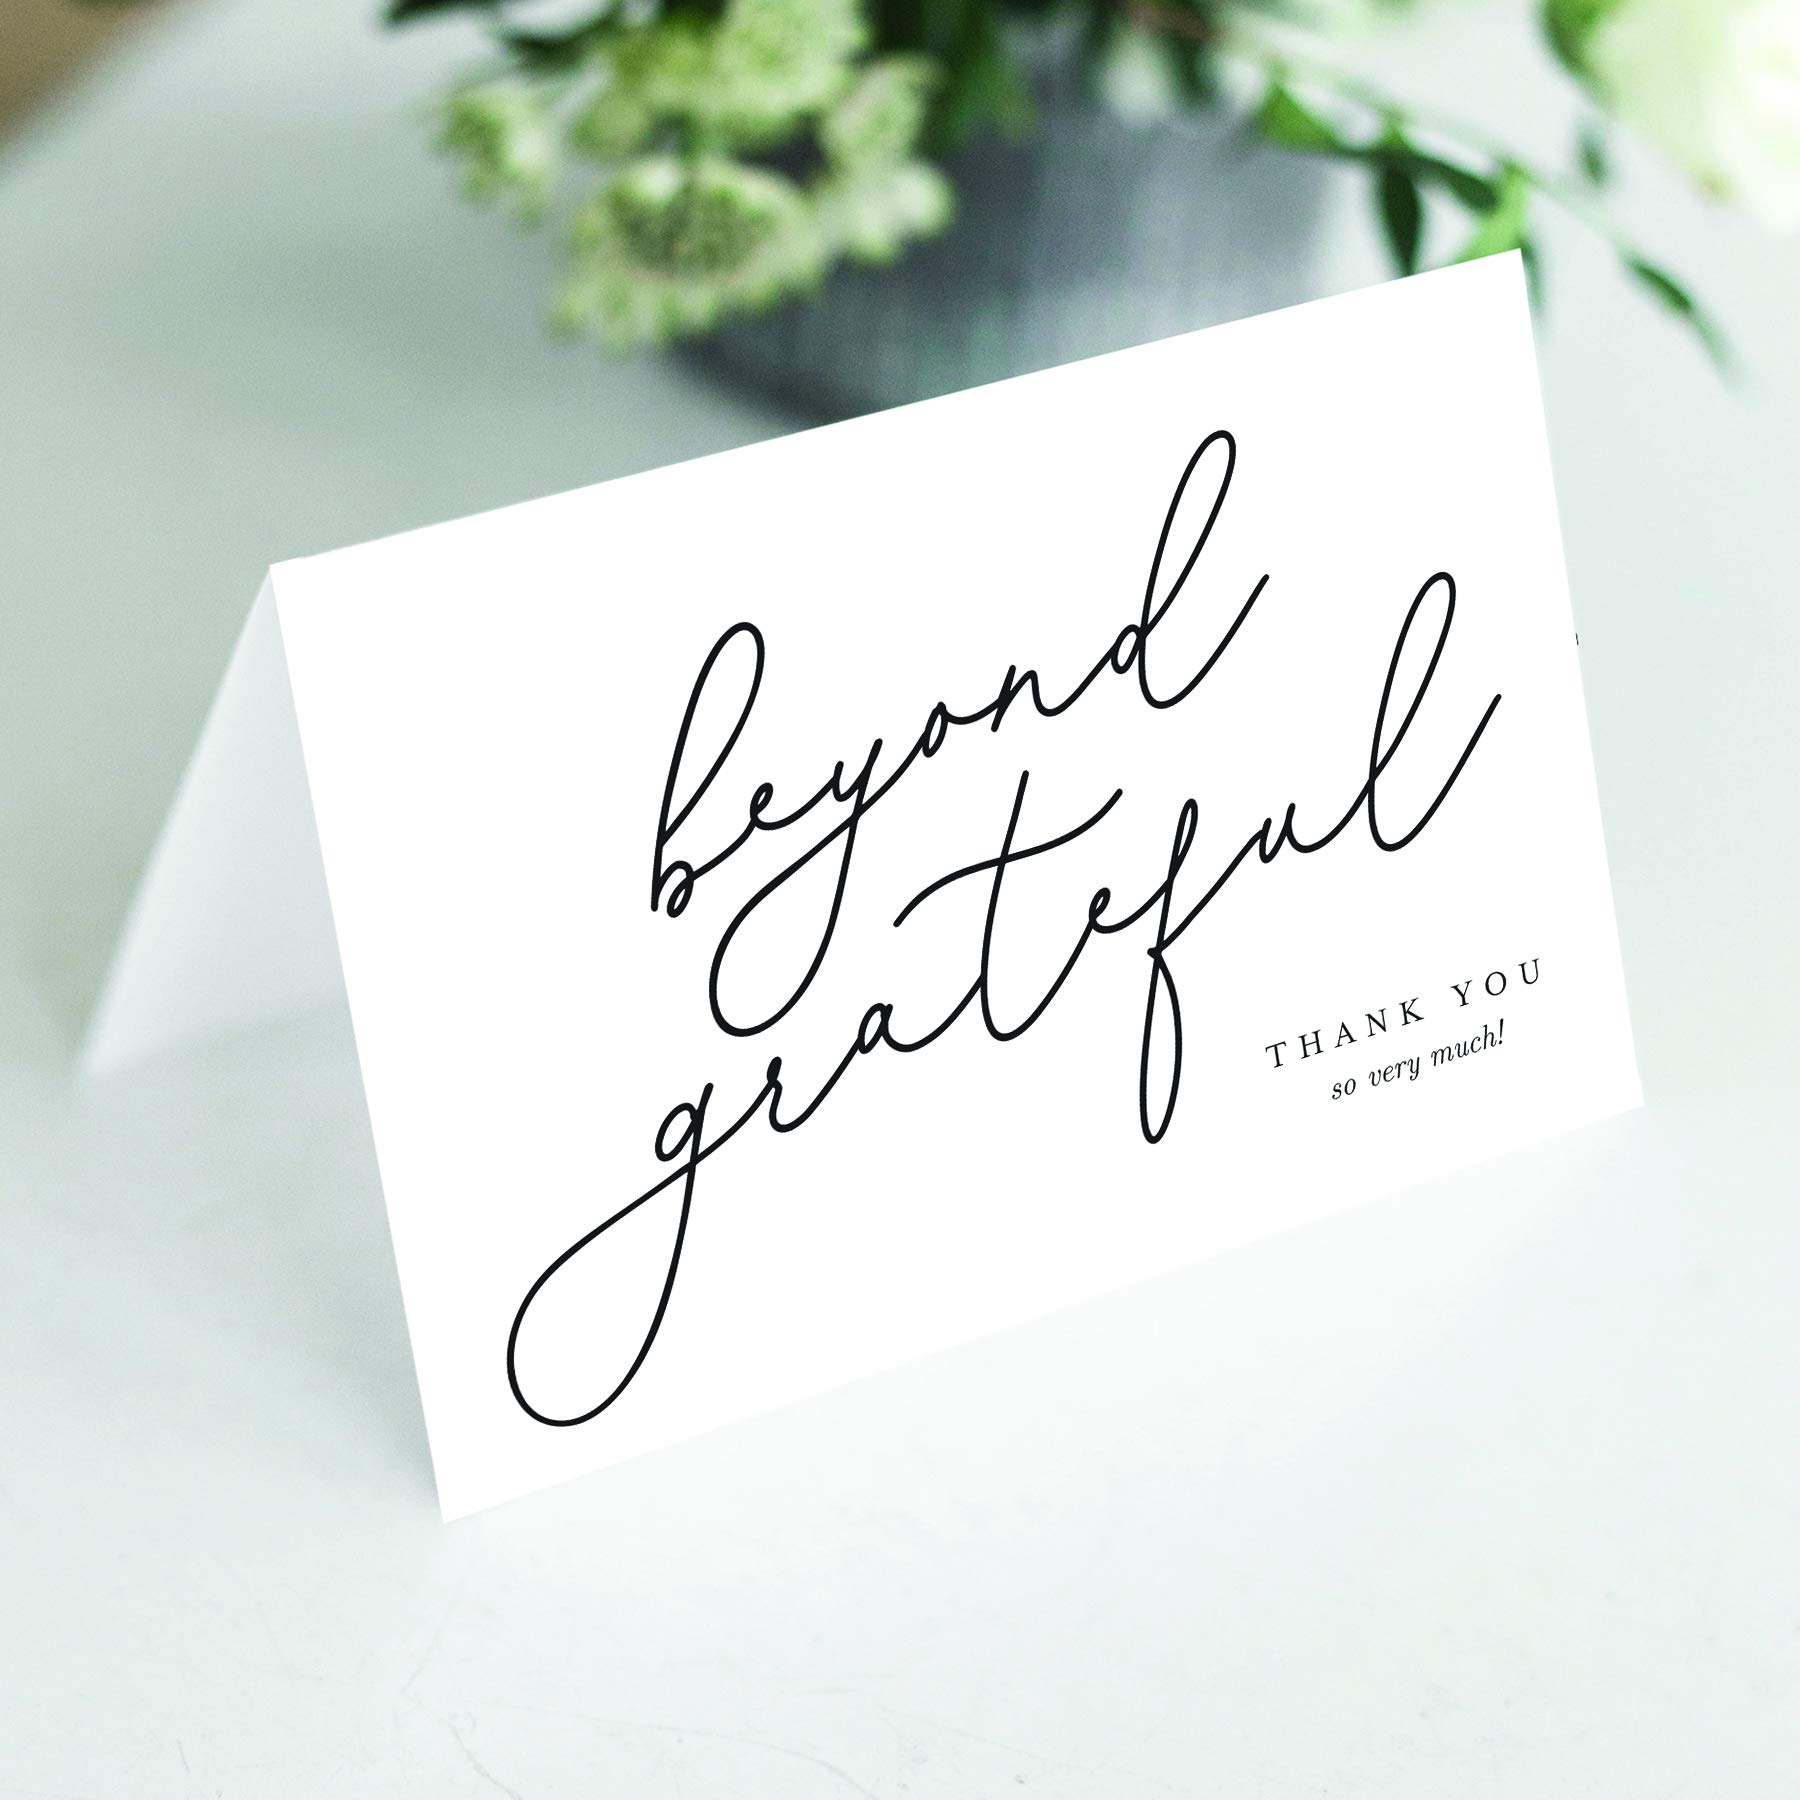 Bliss Collections Beyond Grateful Thank You Cards with Envelopes, Pack of 25, 4x6 Folded, Tented, Bulk, Perfect for: Wedding, Bridal Shower, Baby Shower, Birthday, or just to say thanks!